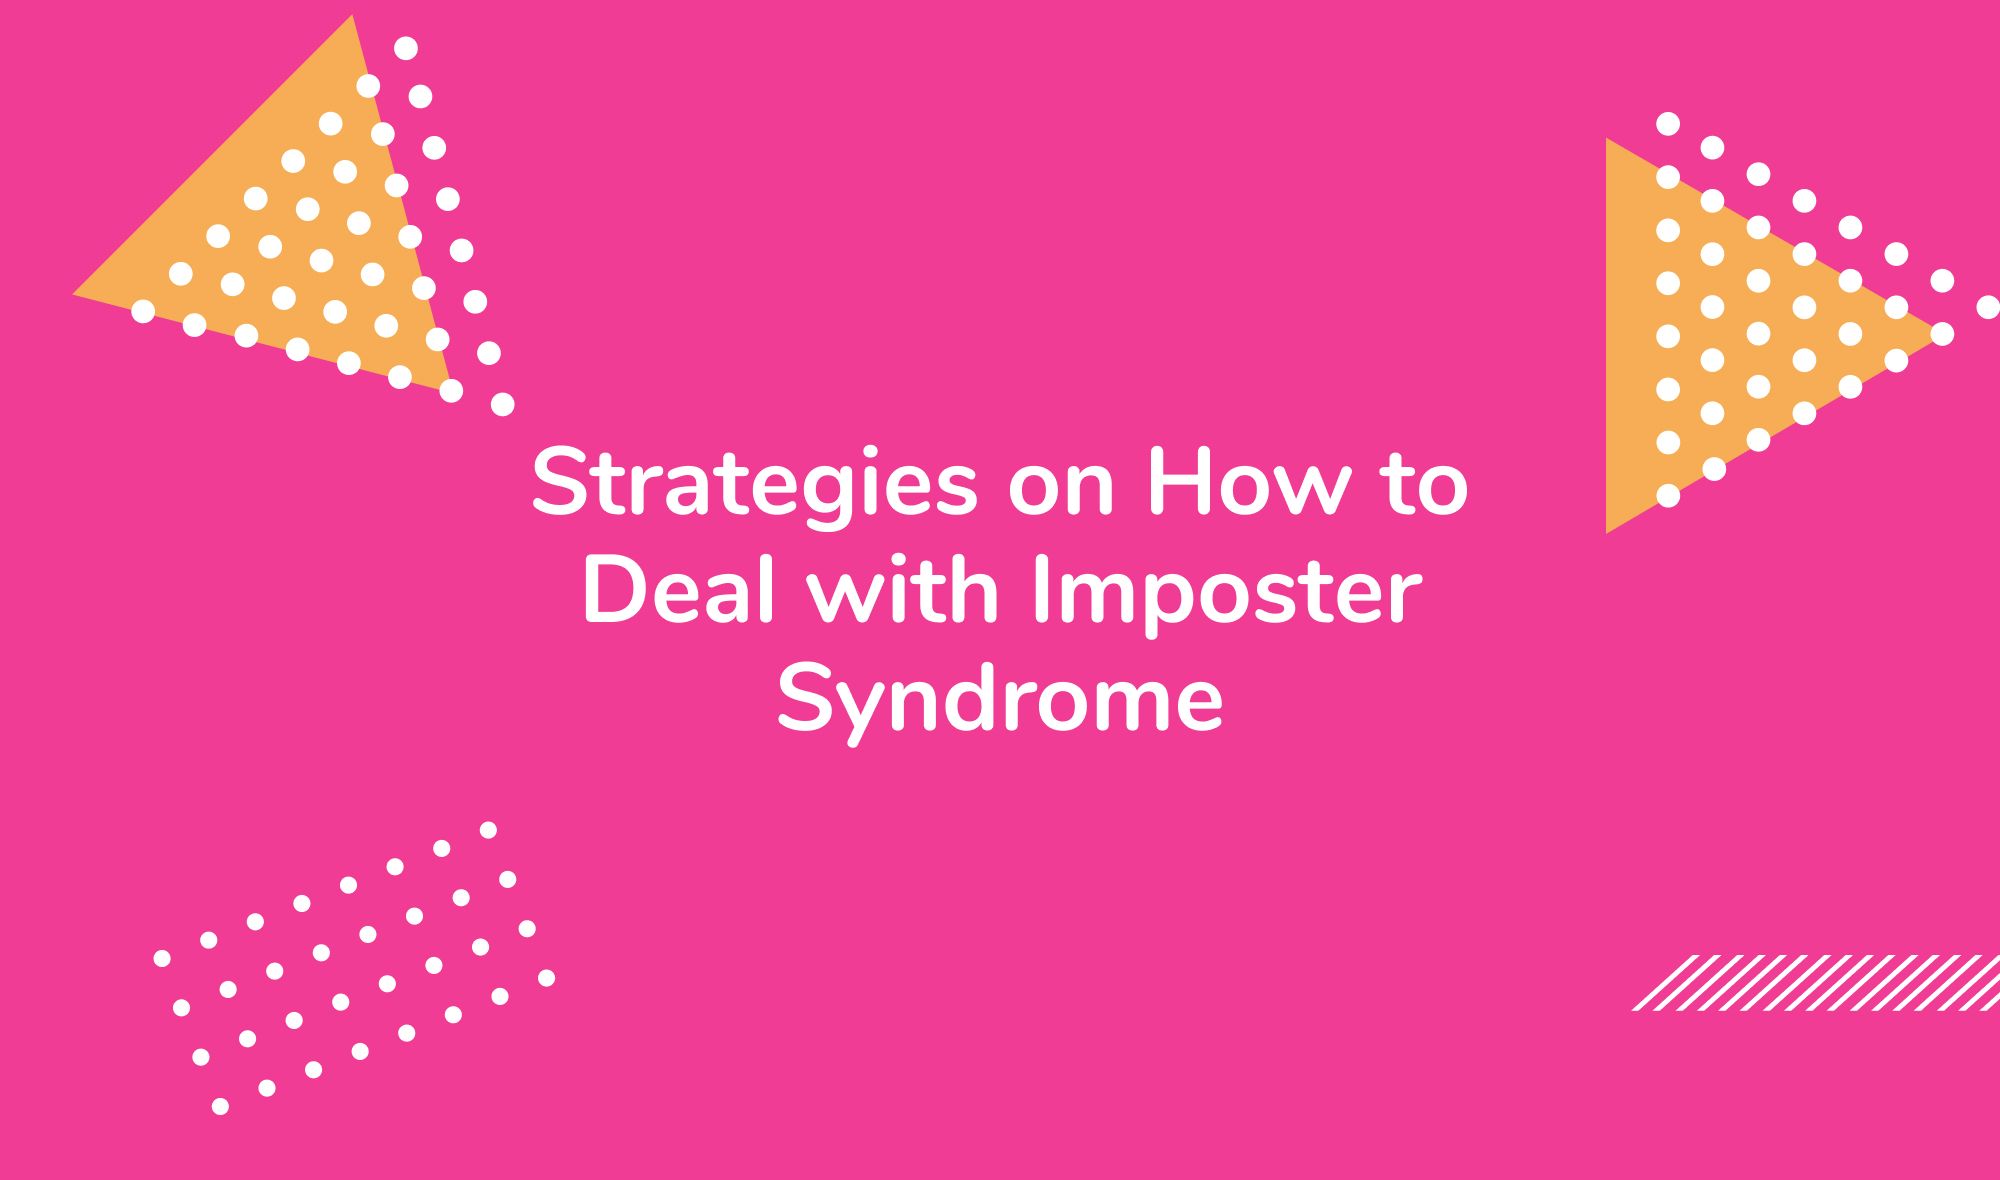 Strategies on How to Deal with Imposter Syndrome